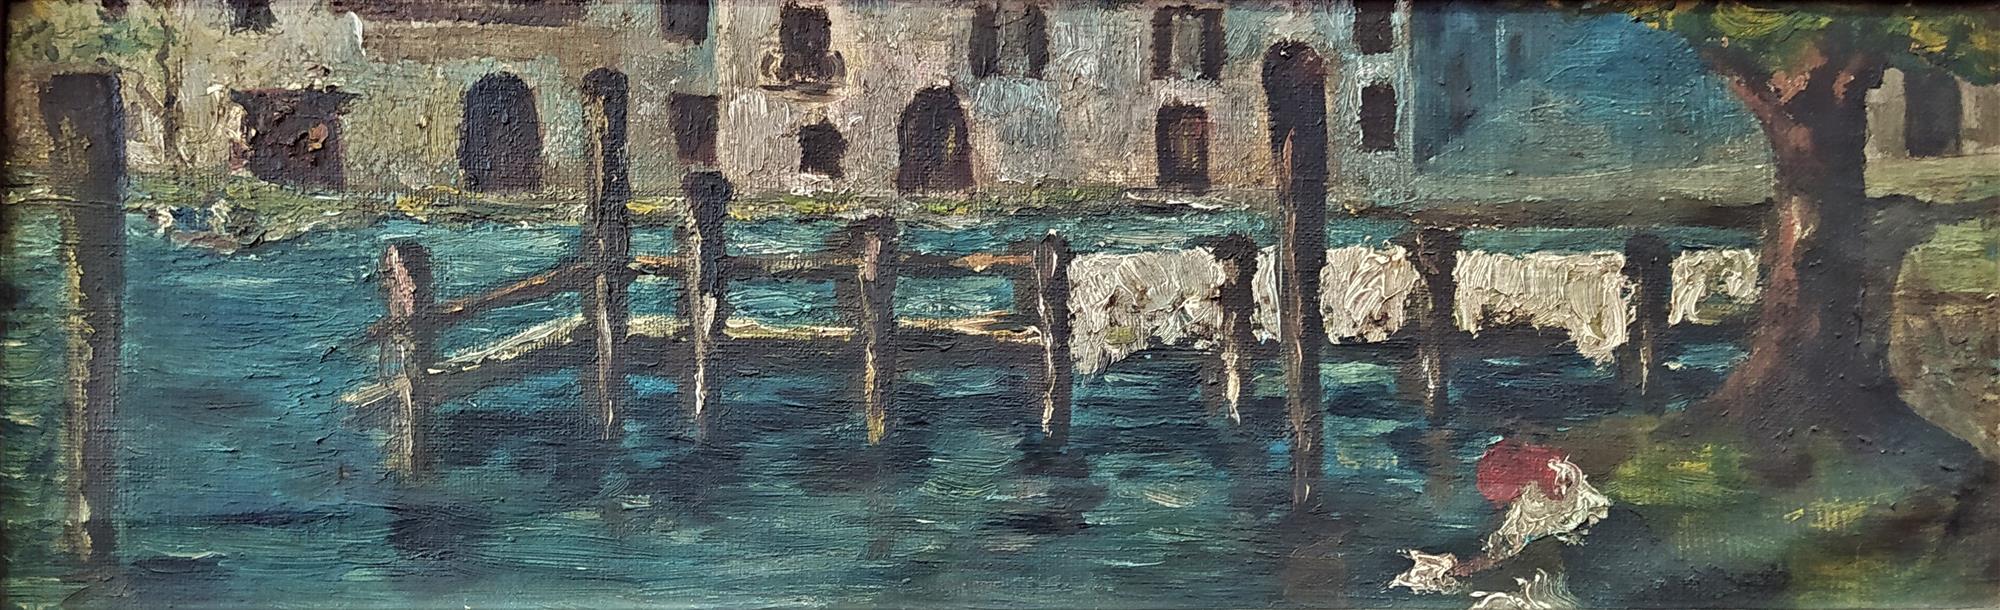 Laundress at the wharf oil on canvas